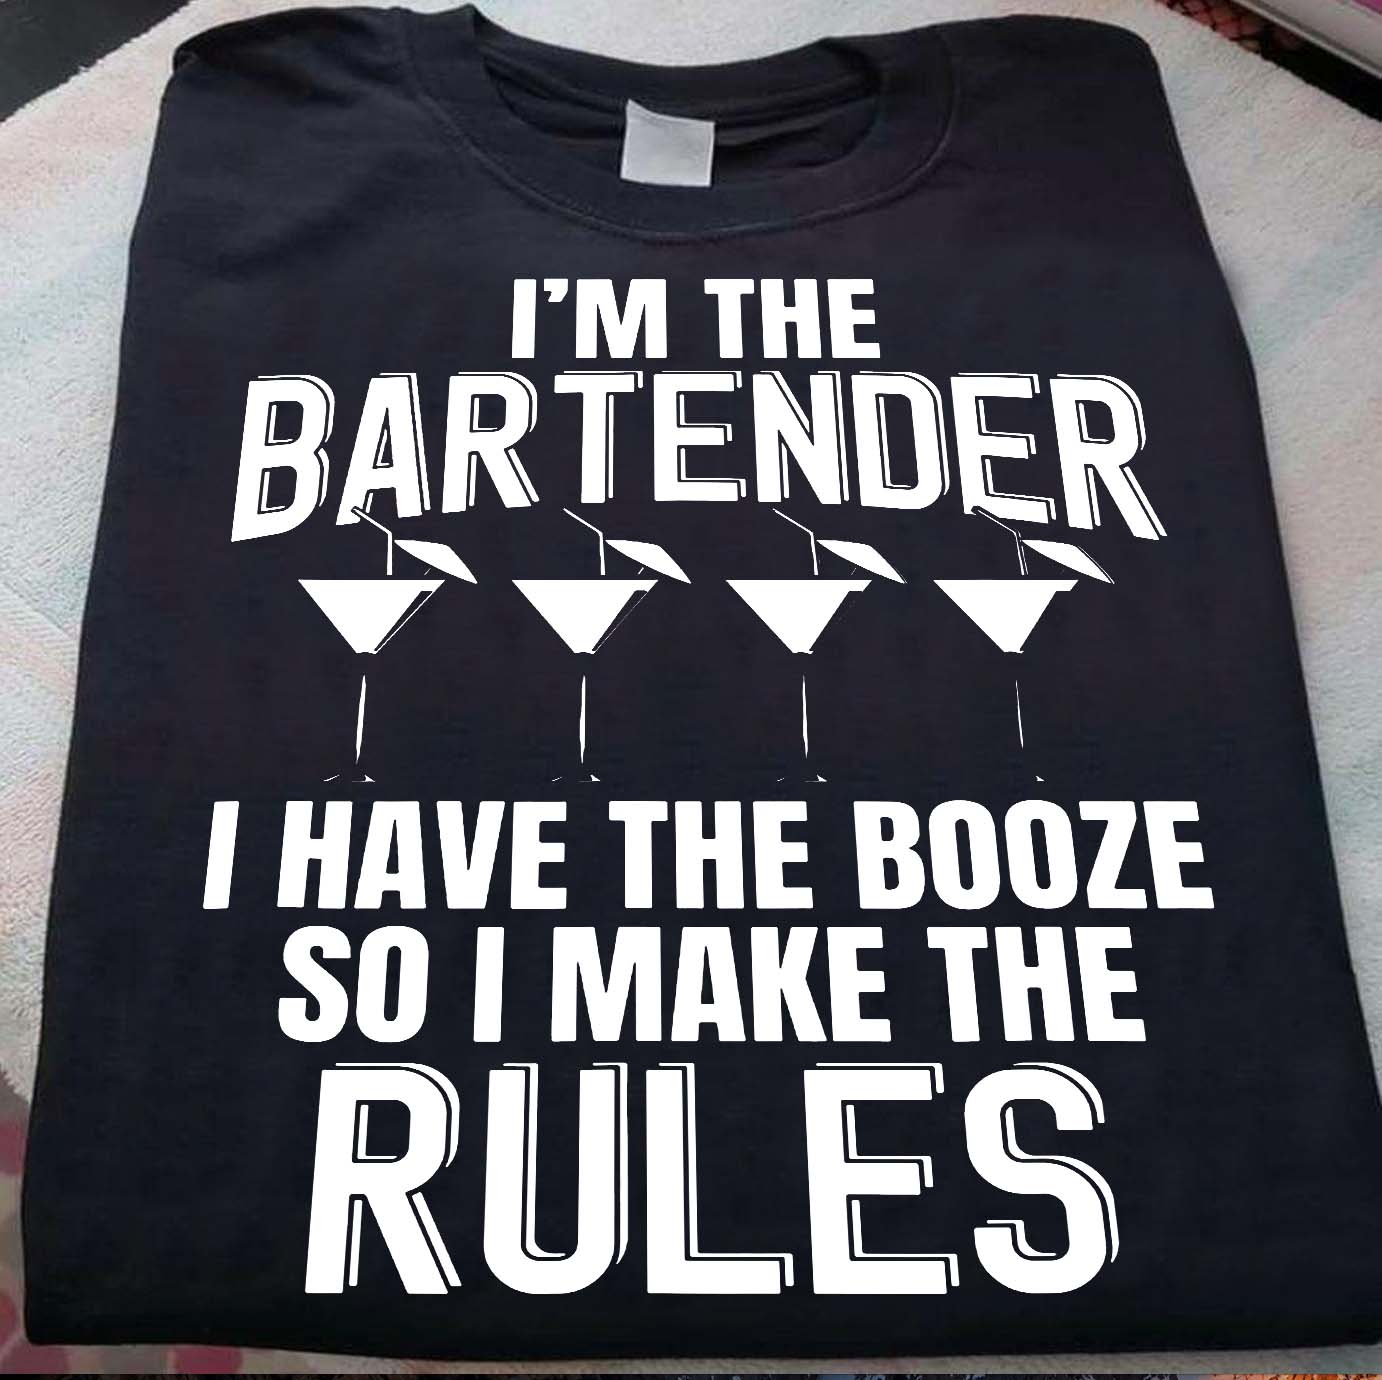 I'm the bartender I have the booze so I make the rules